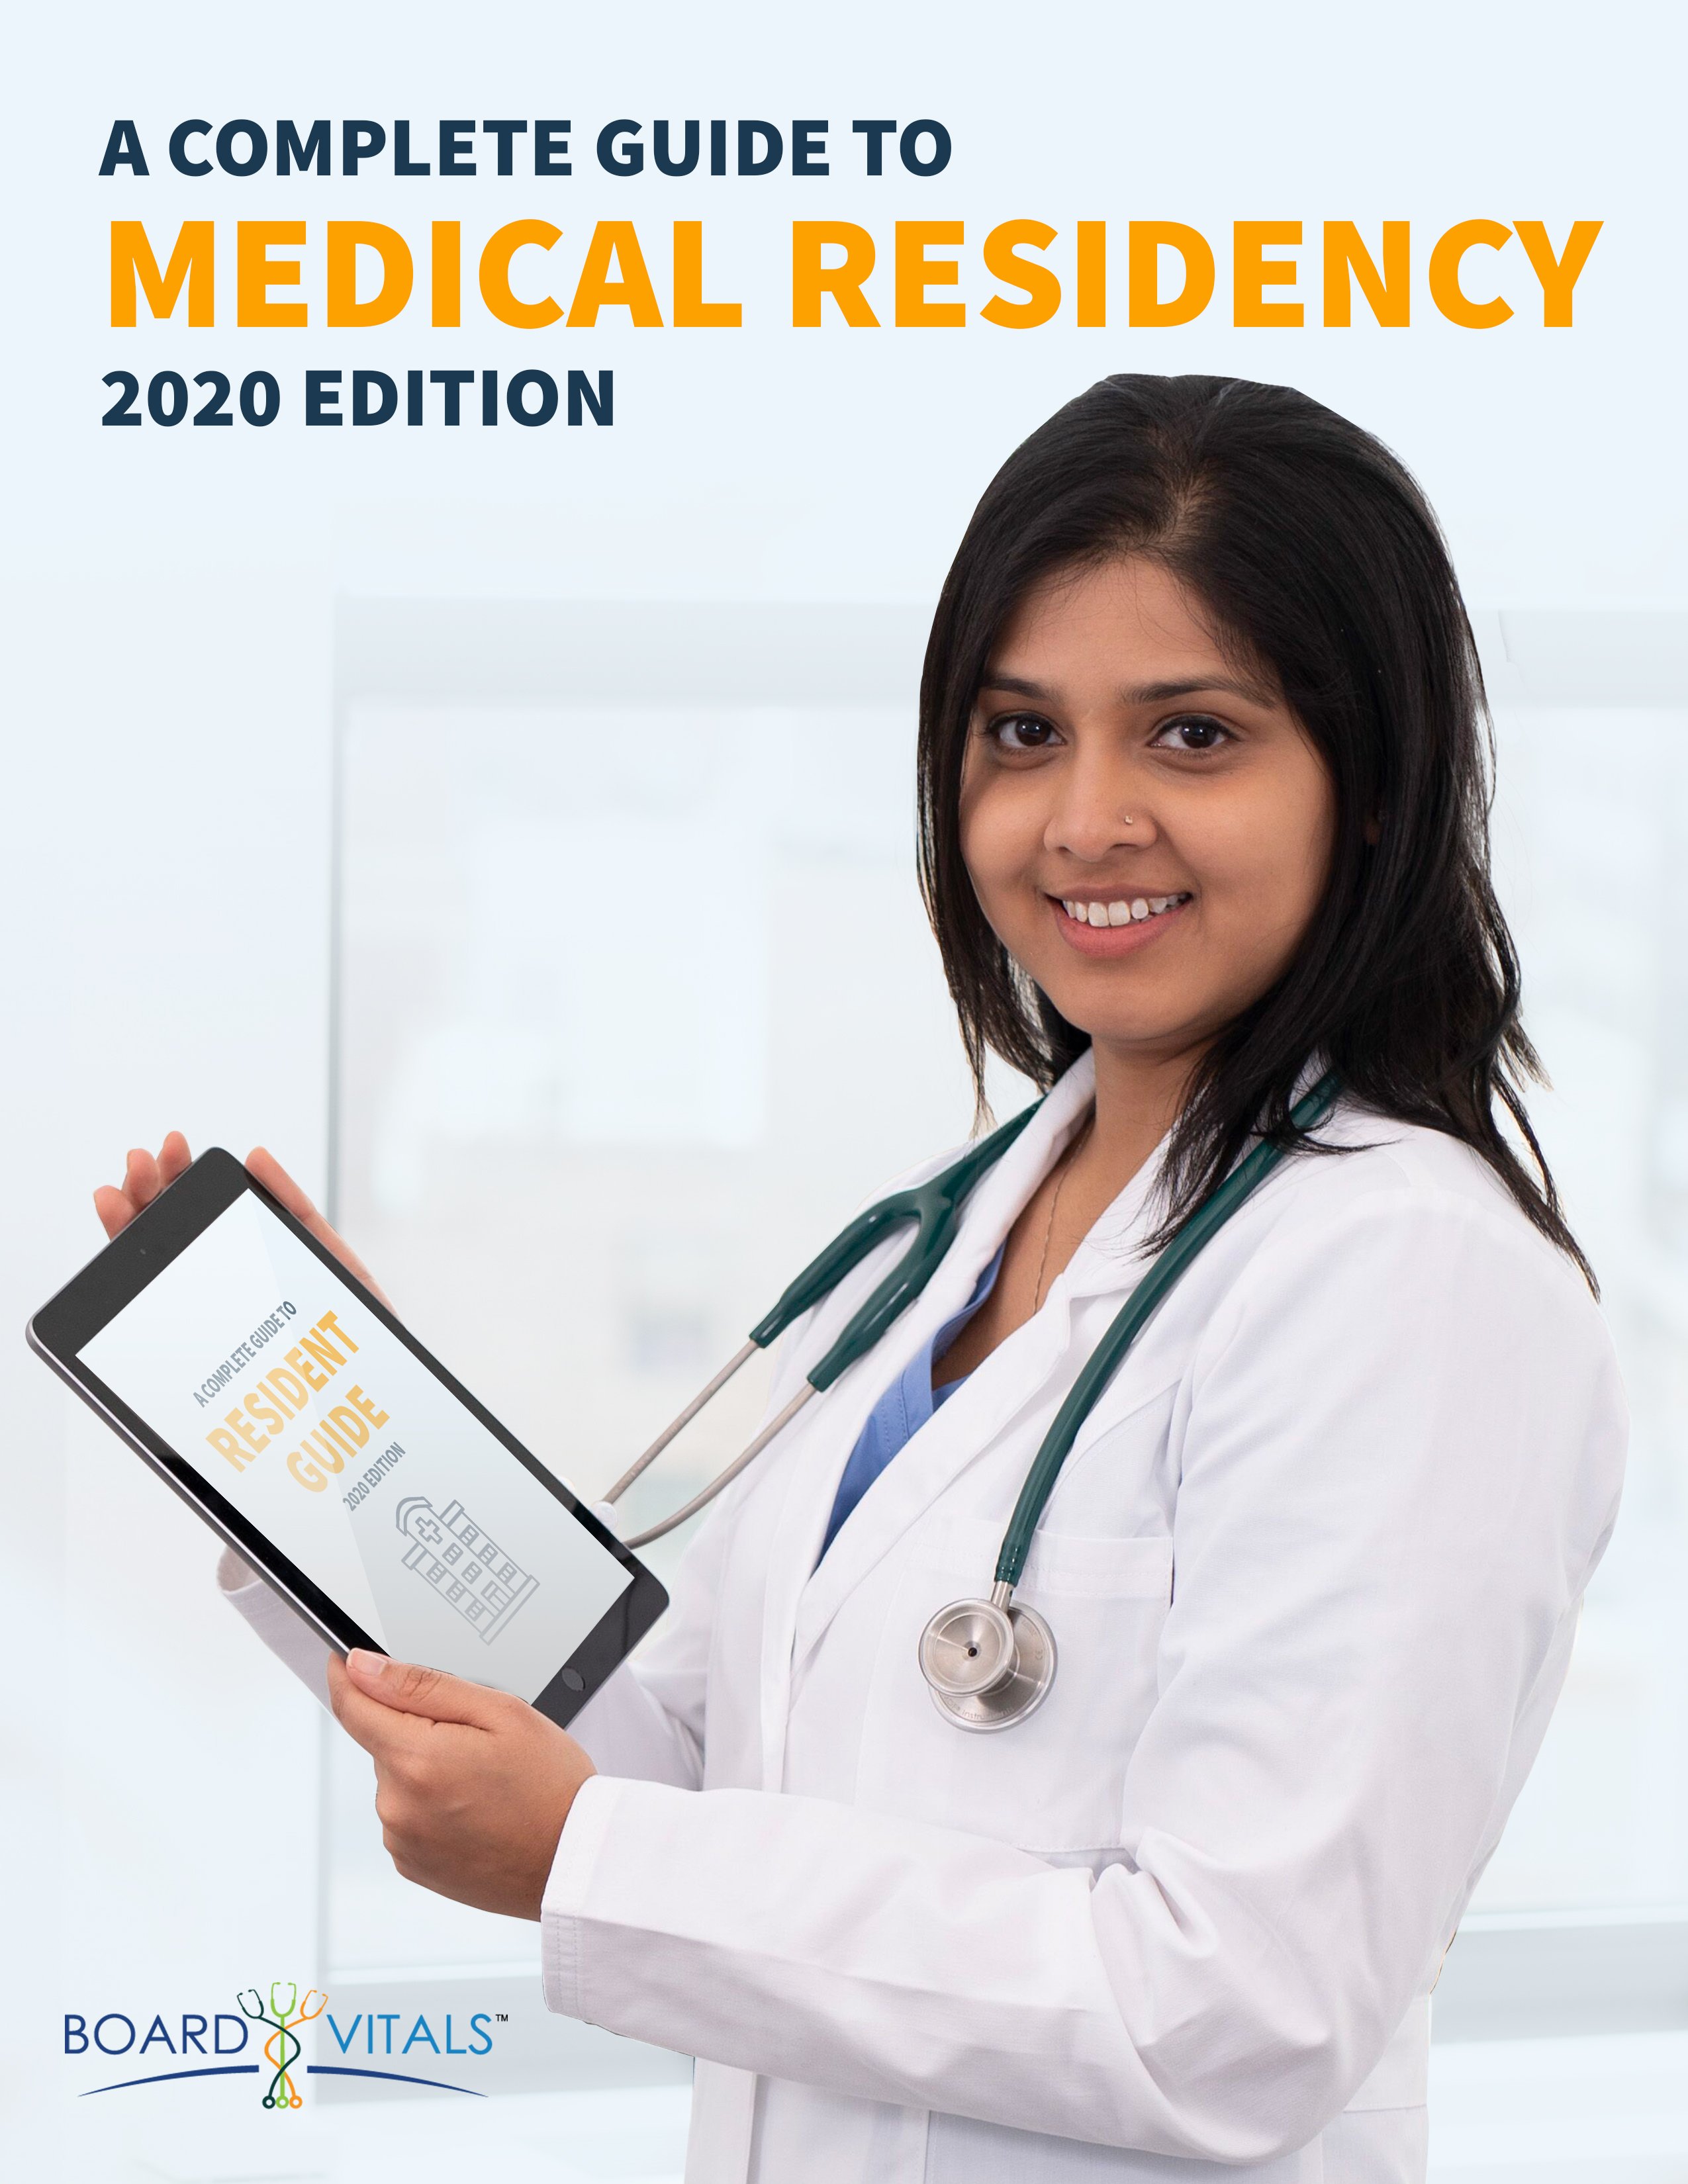 BoardVitals' eBook A Complete Guide to Medical Residency